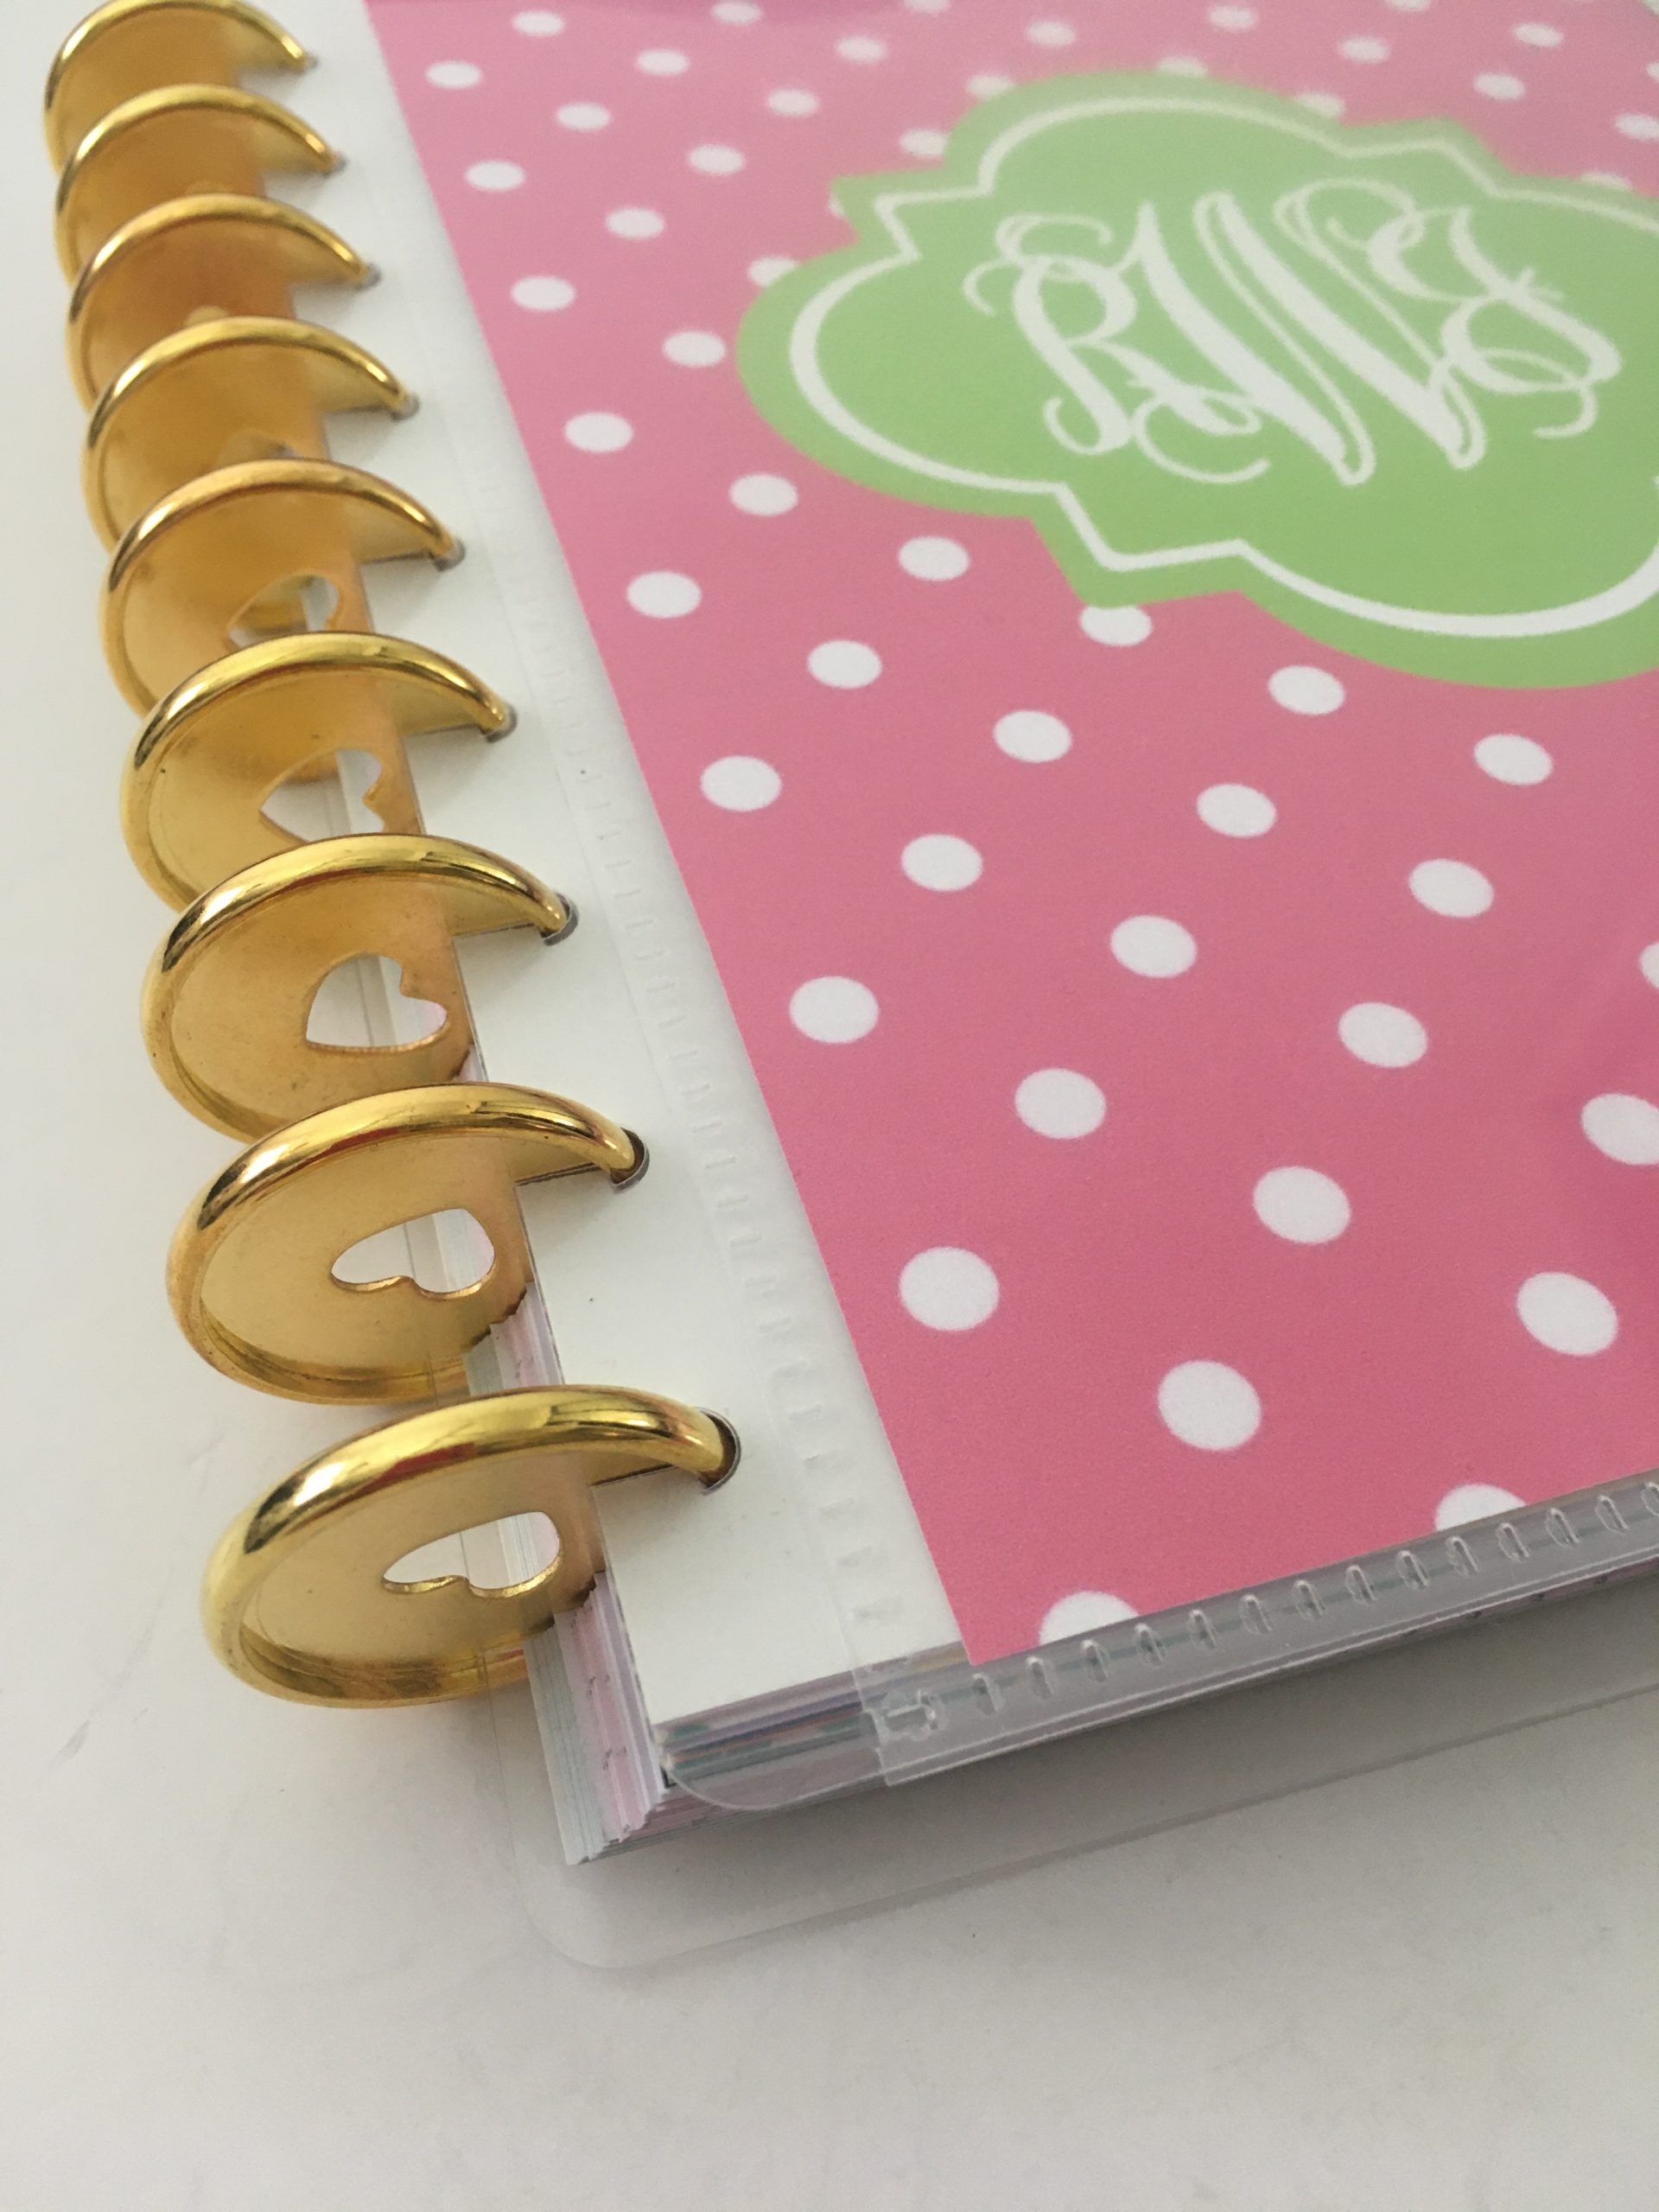 How to make your own DIY Discbound Bullet Journal, Notebook or Planner